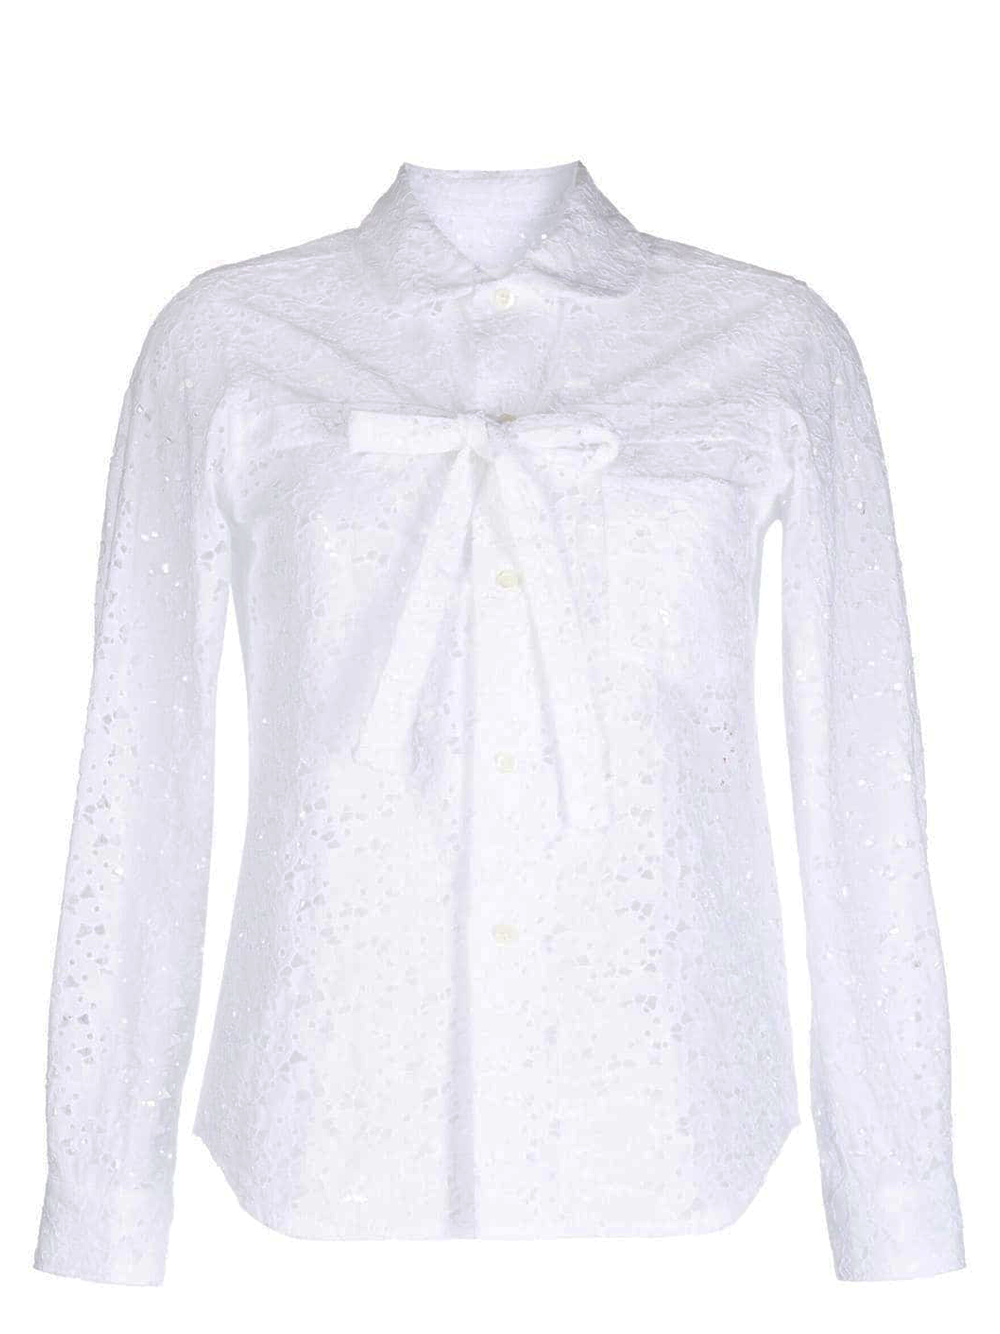 COMME des GARCONS GIRL Embroidery Lace Peter Pan Blouse White 1